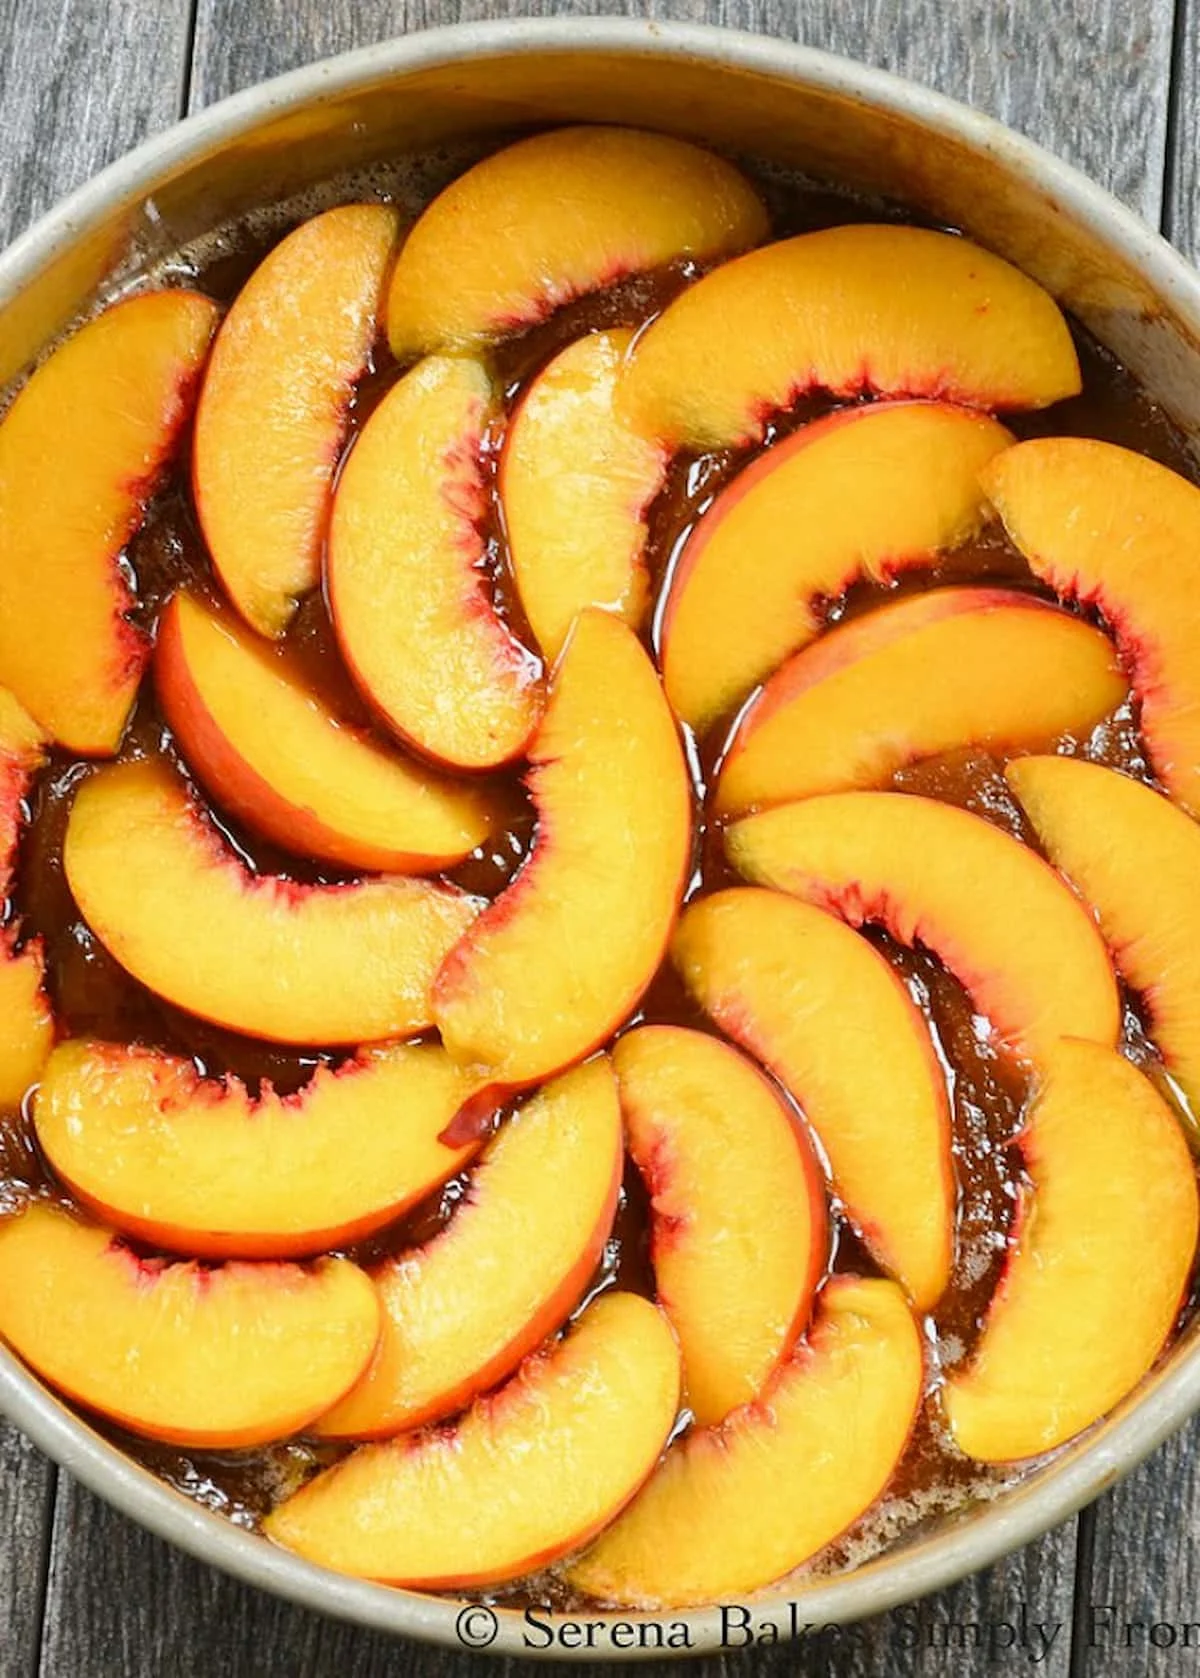 A cake pan filled with the caramelized sugar and butter mixture then topped with sliced peaches going in a circle.